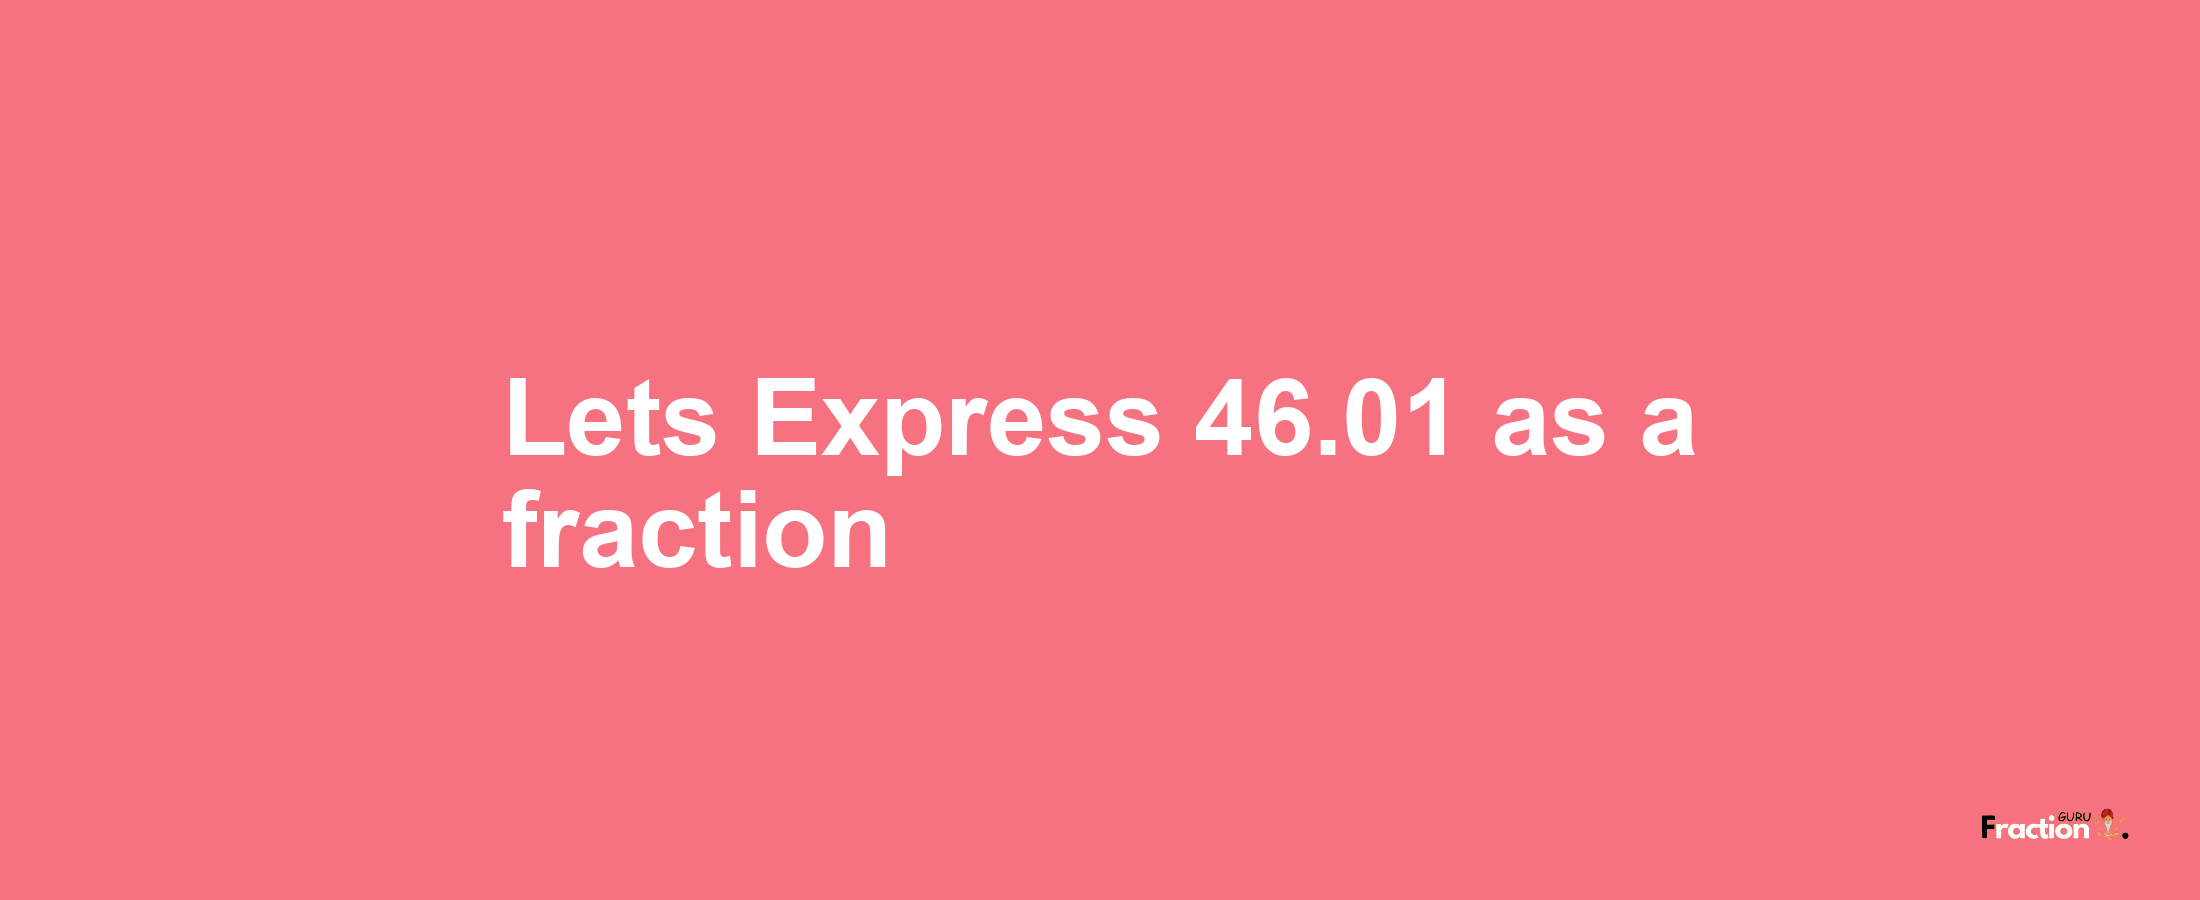 Lets Express 46.01 as afraction